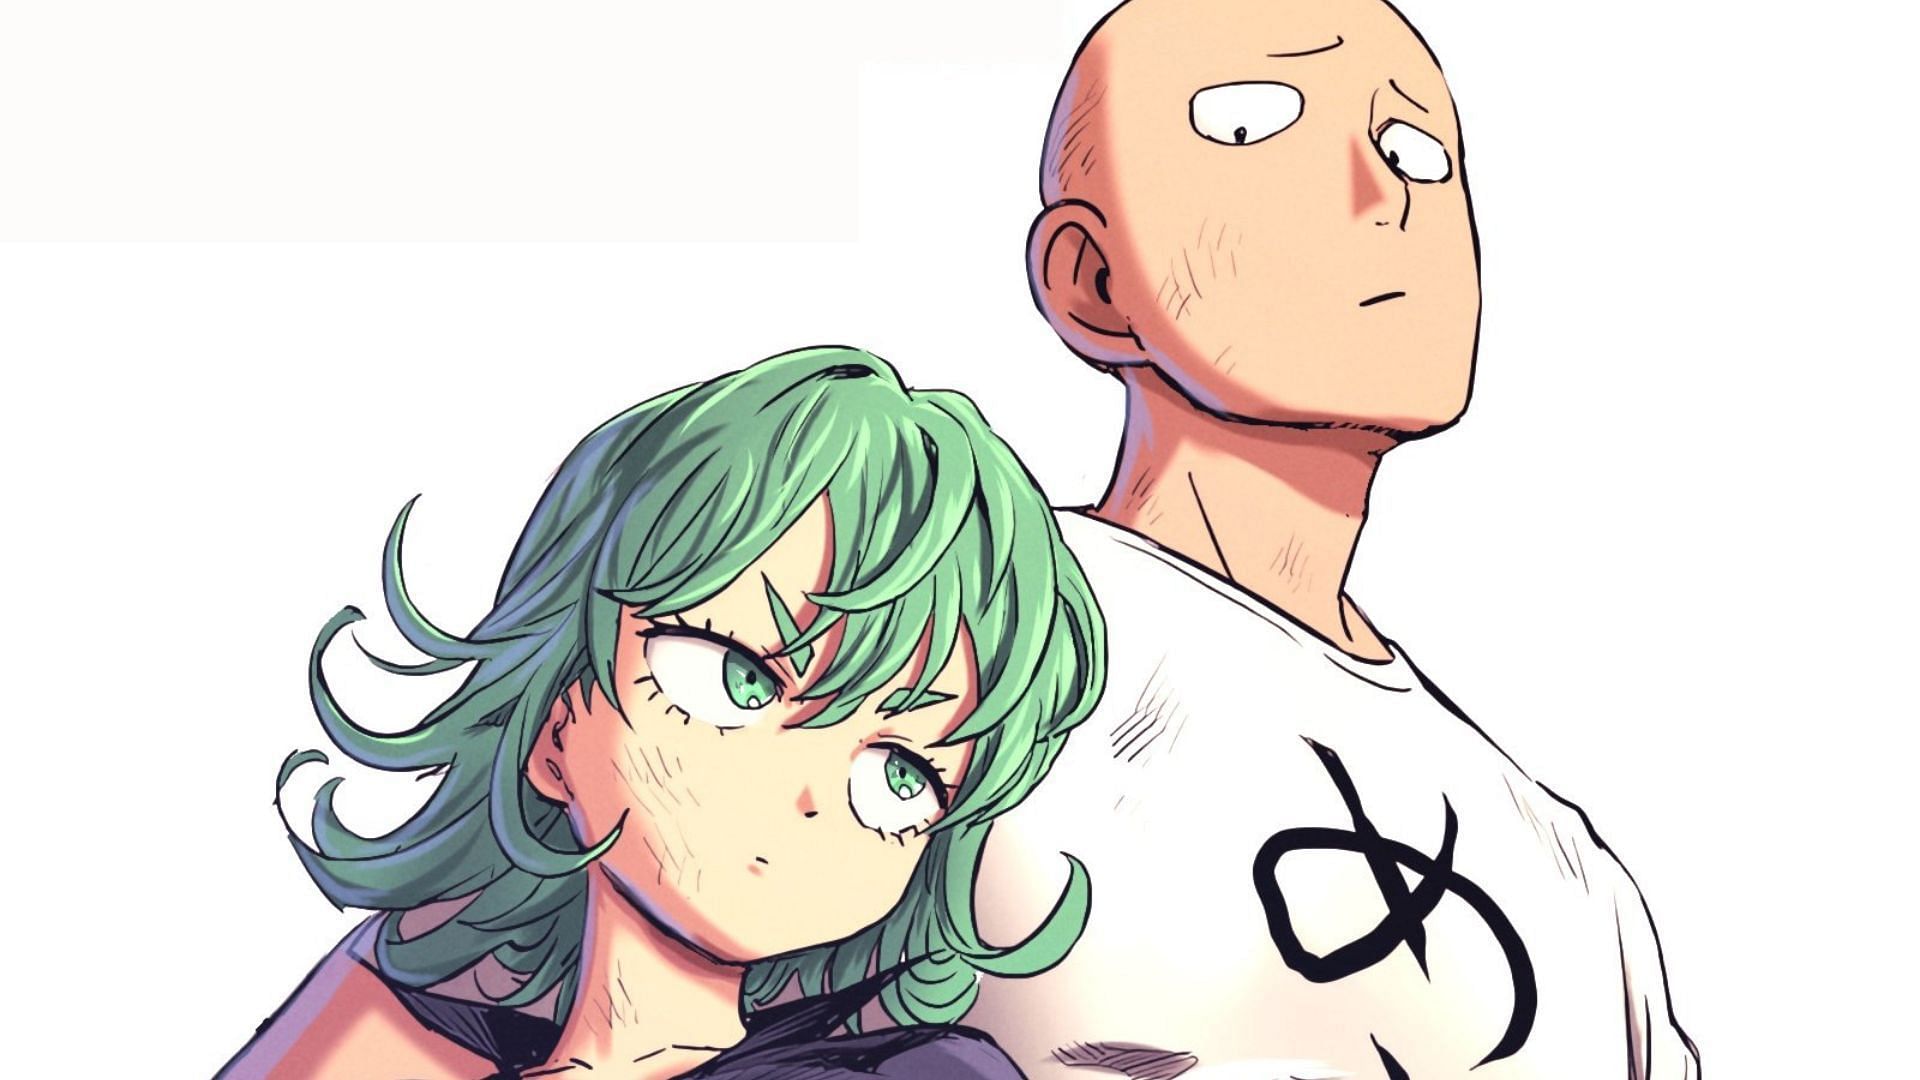 One Punch Man Chapter 182 Tatsumaki Vs Saitama Ends The Blizzard Group Is Back 